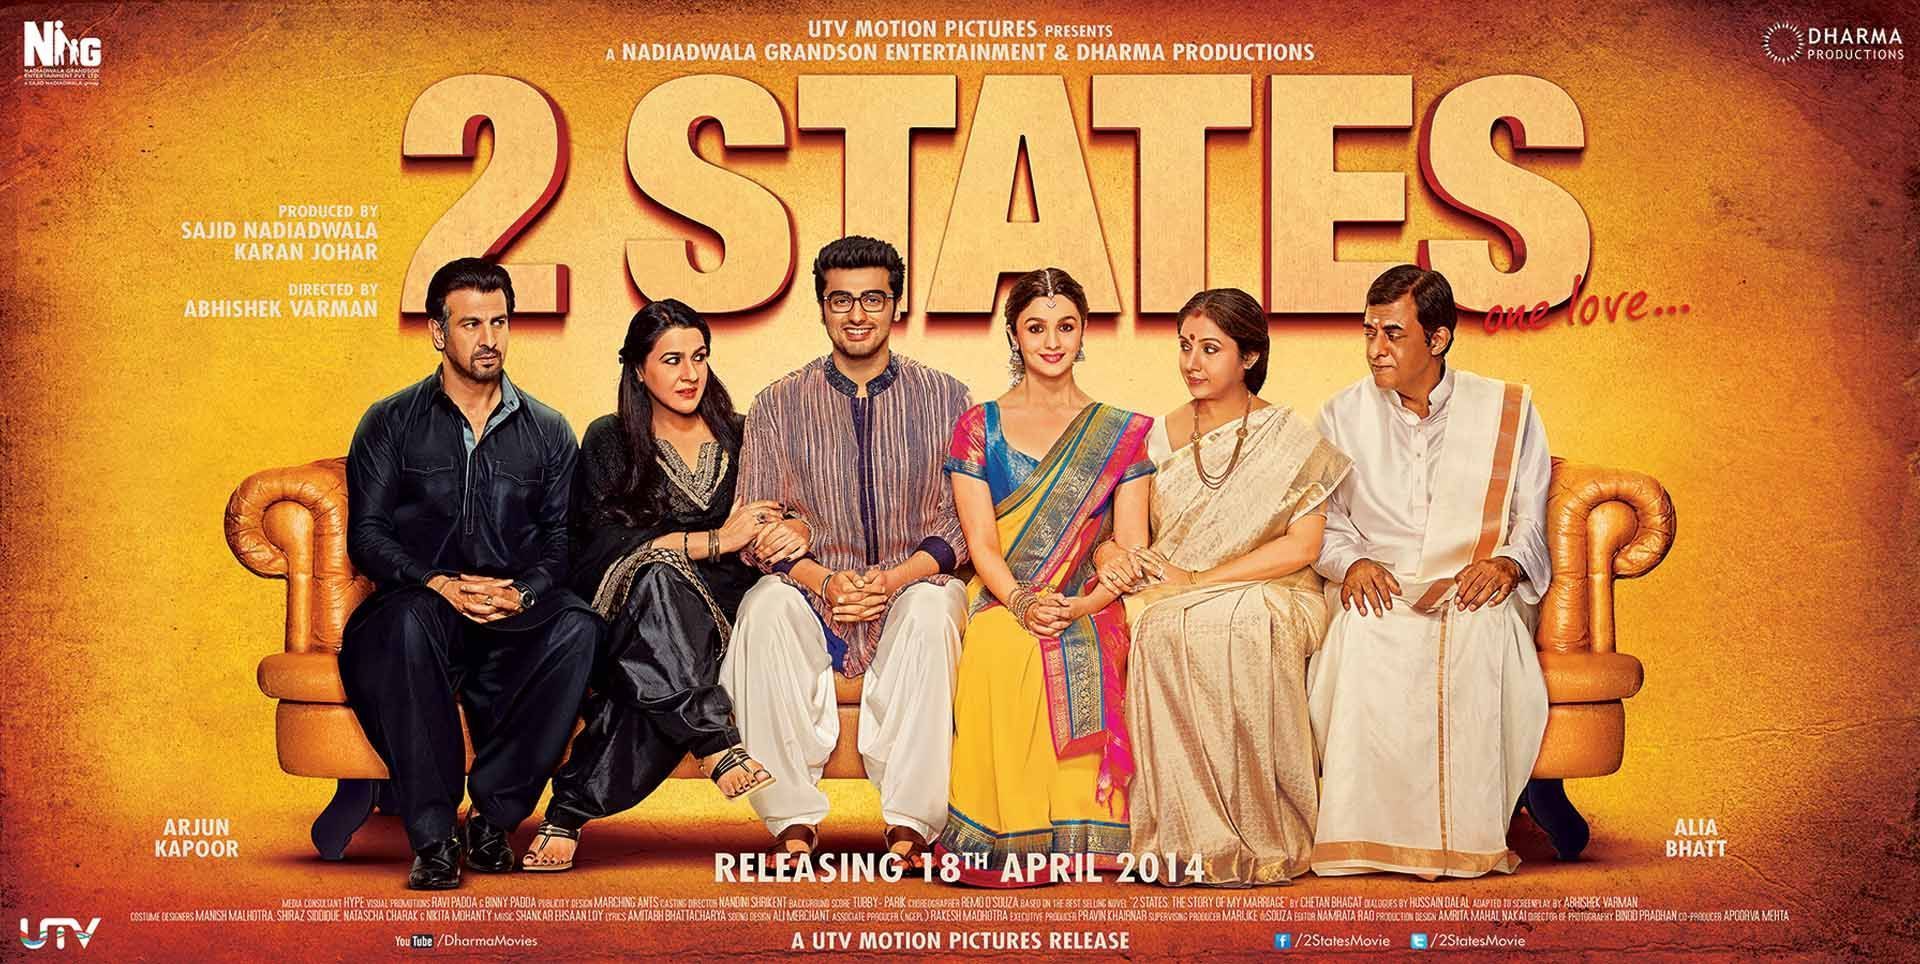 States Movie Poster. HD Bollywood Movies Wallpaper for Mobile